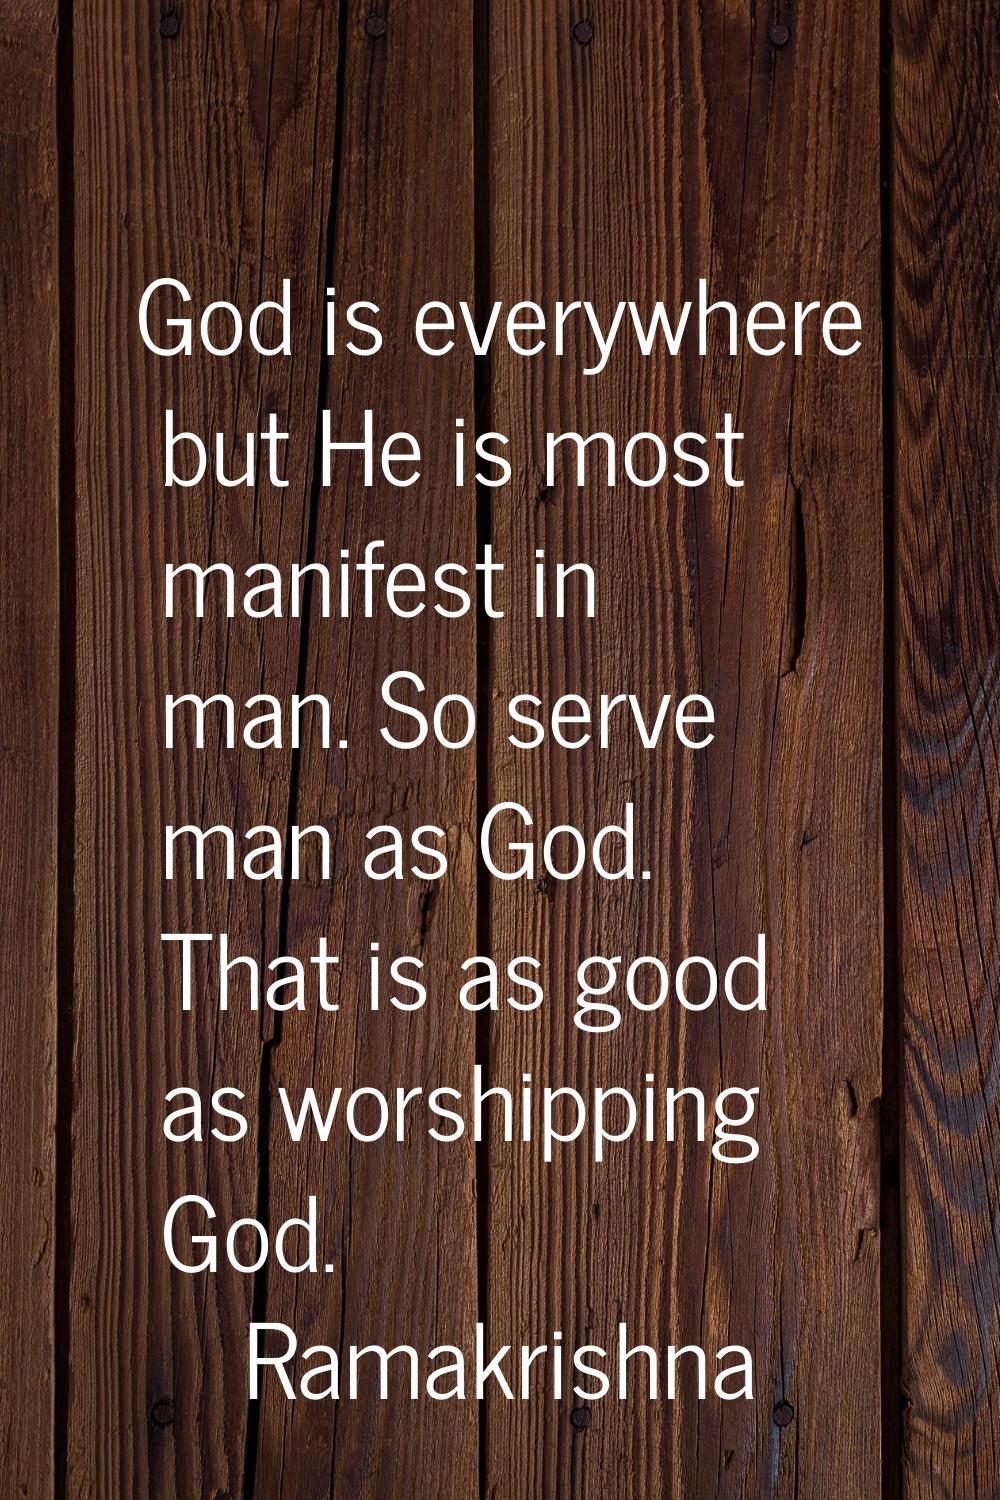 God is everywhere but He is most manifest in man. So serve man as God. That is as good as worshippi